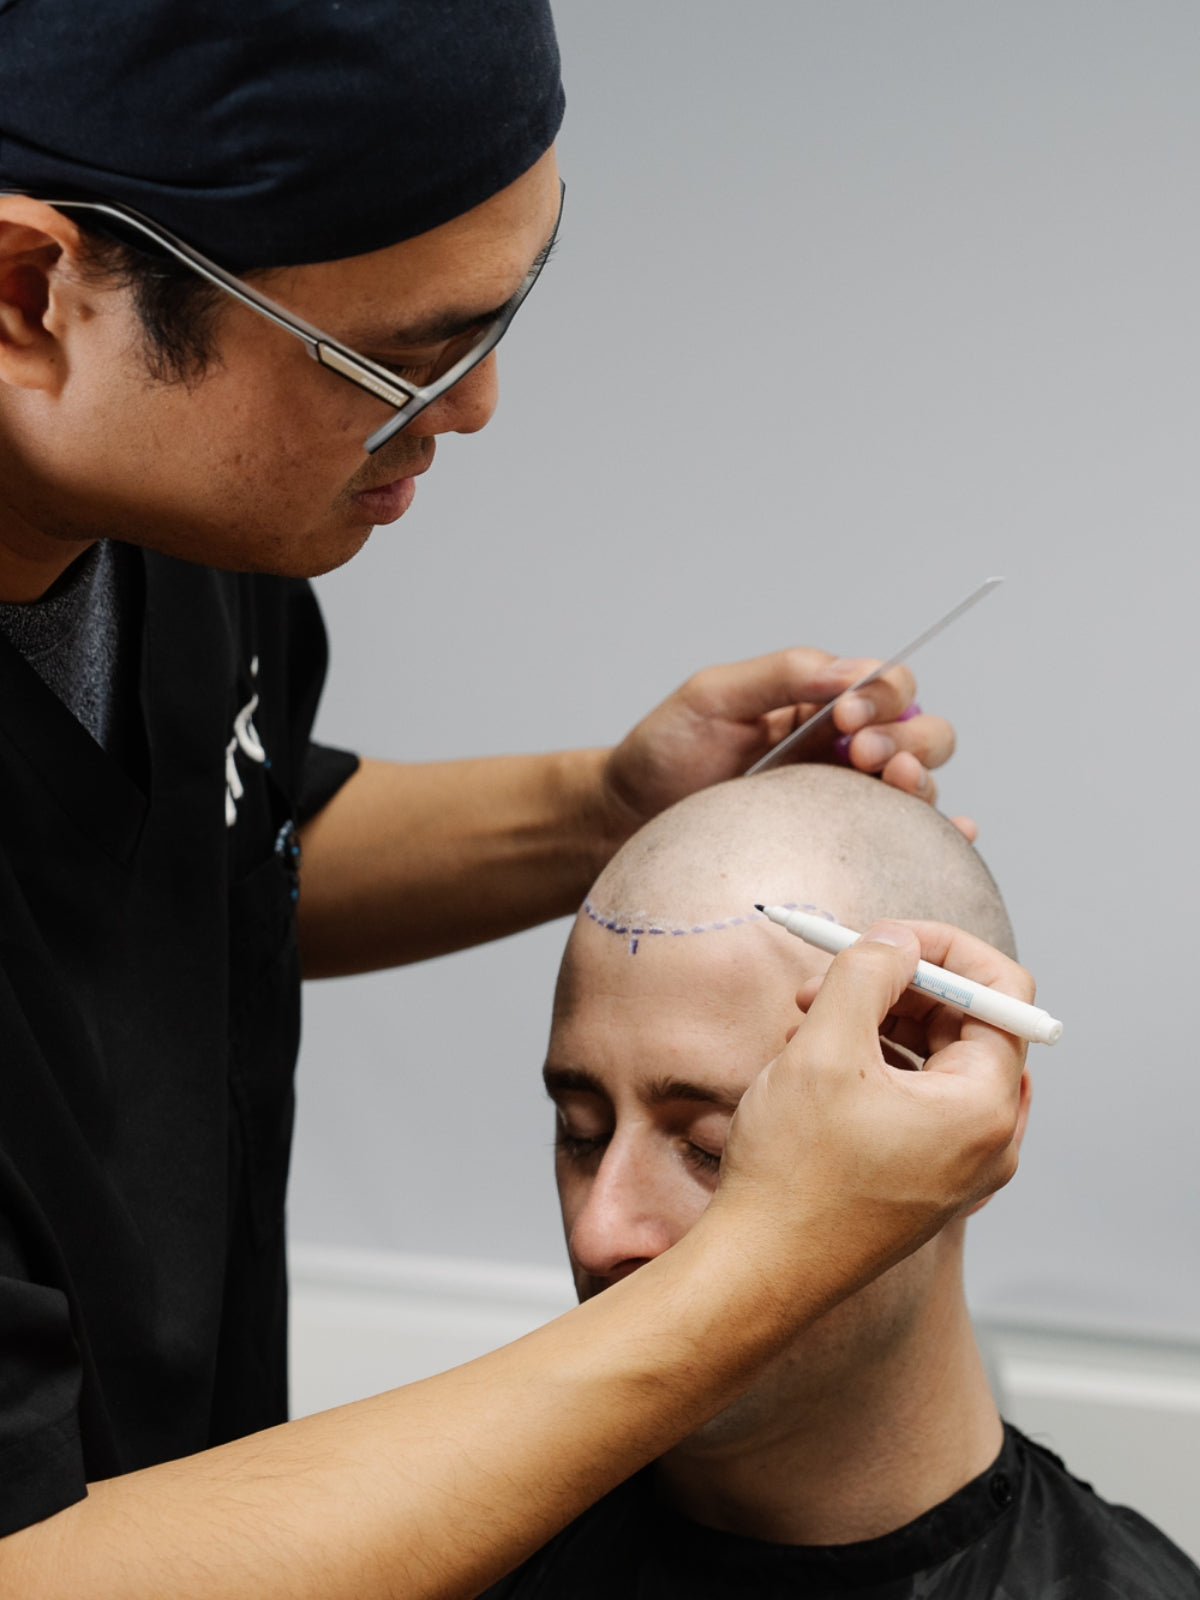 Considering factors contributing to the cost of a hair transplant include donor area's viability and other variables that play a part in what's realistically achievable.